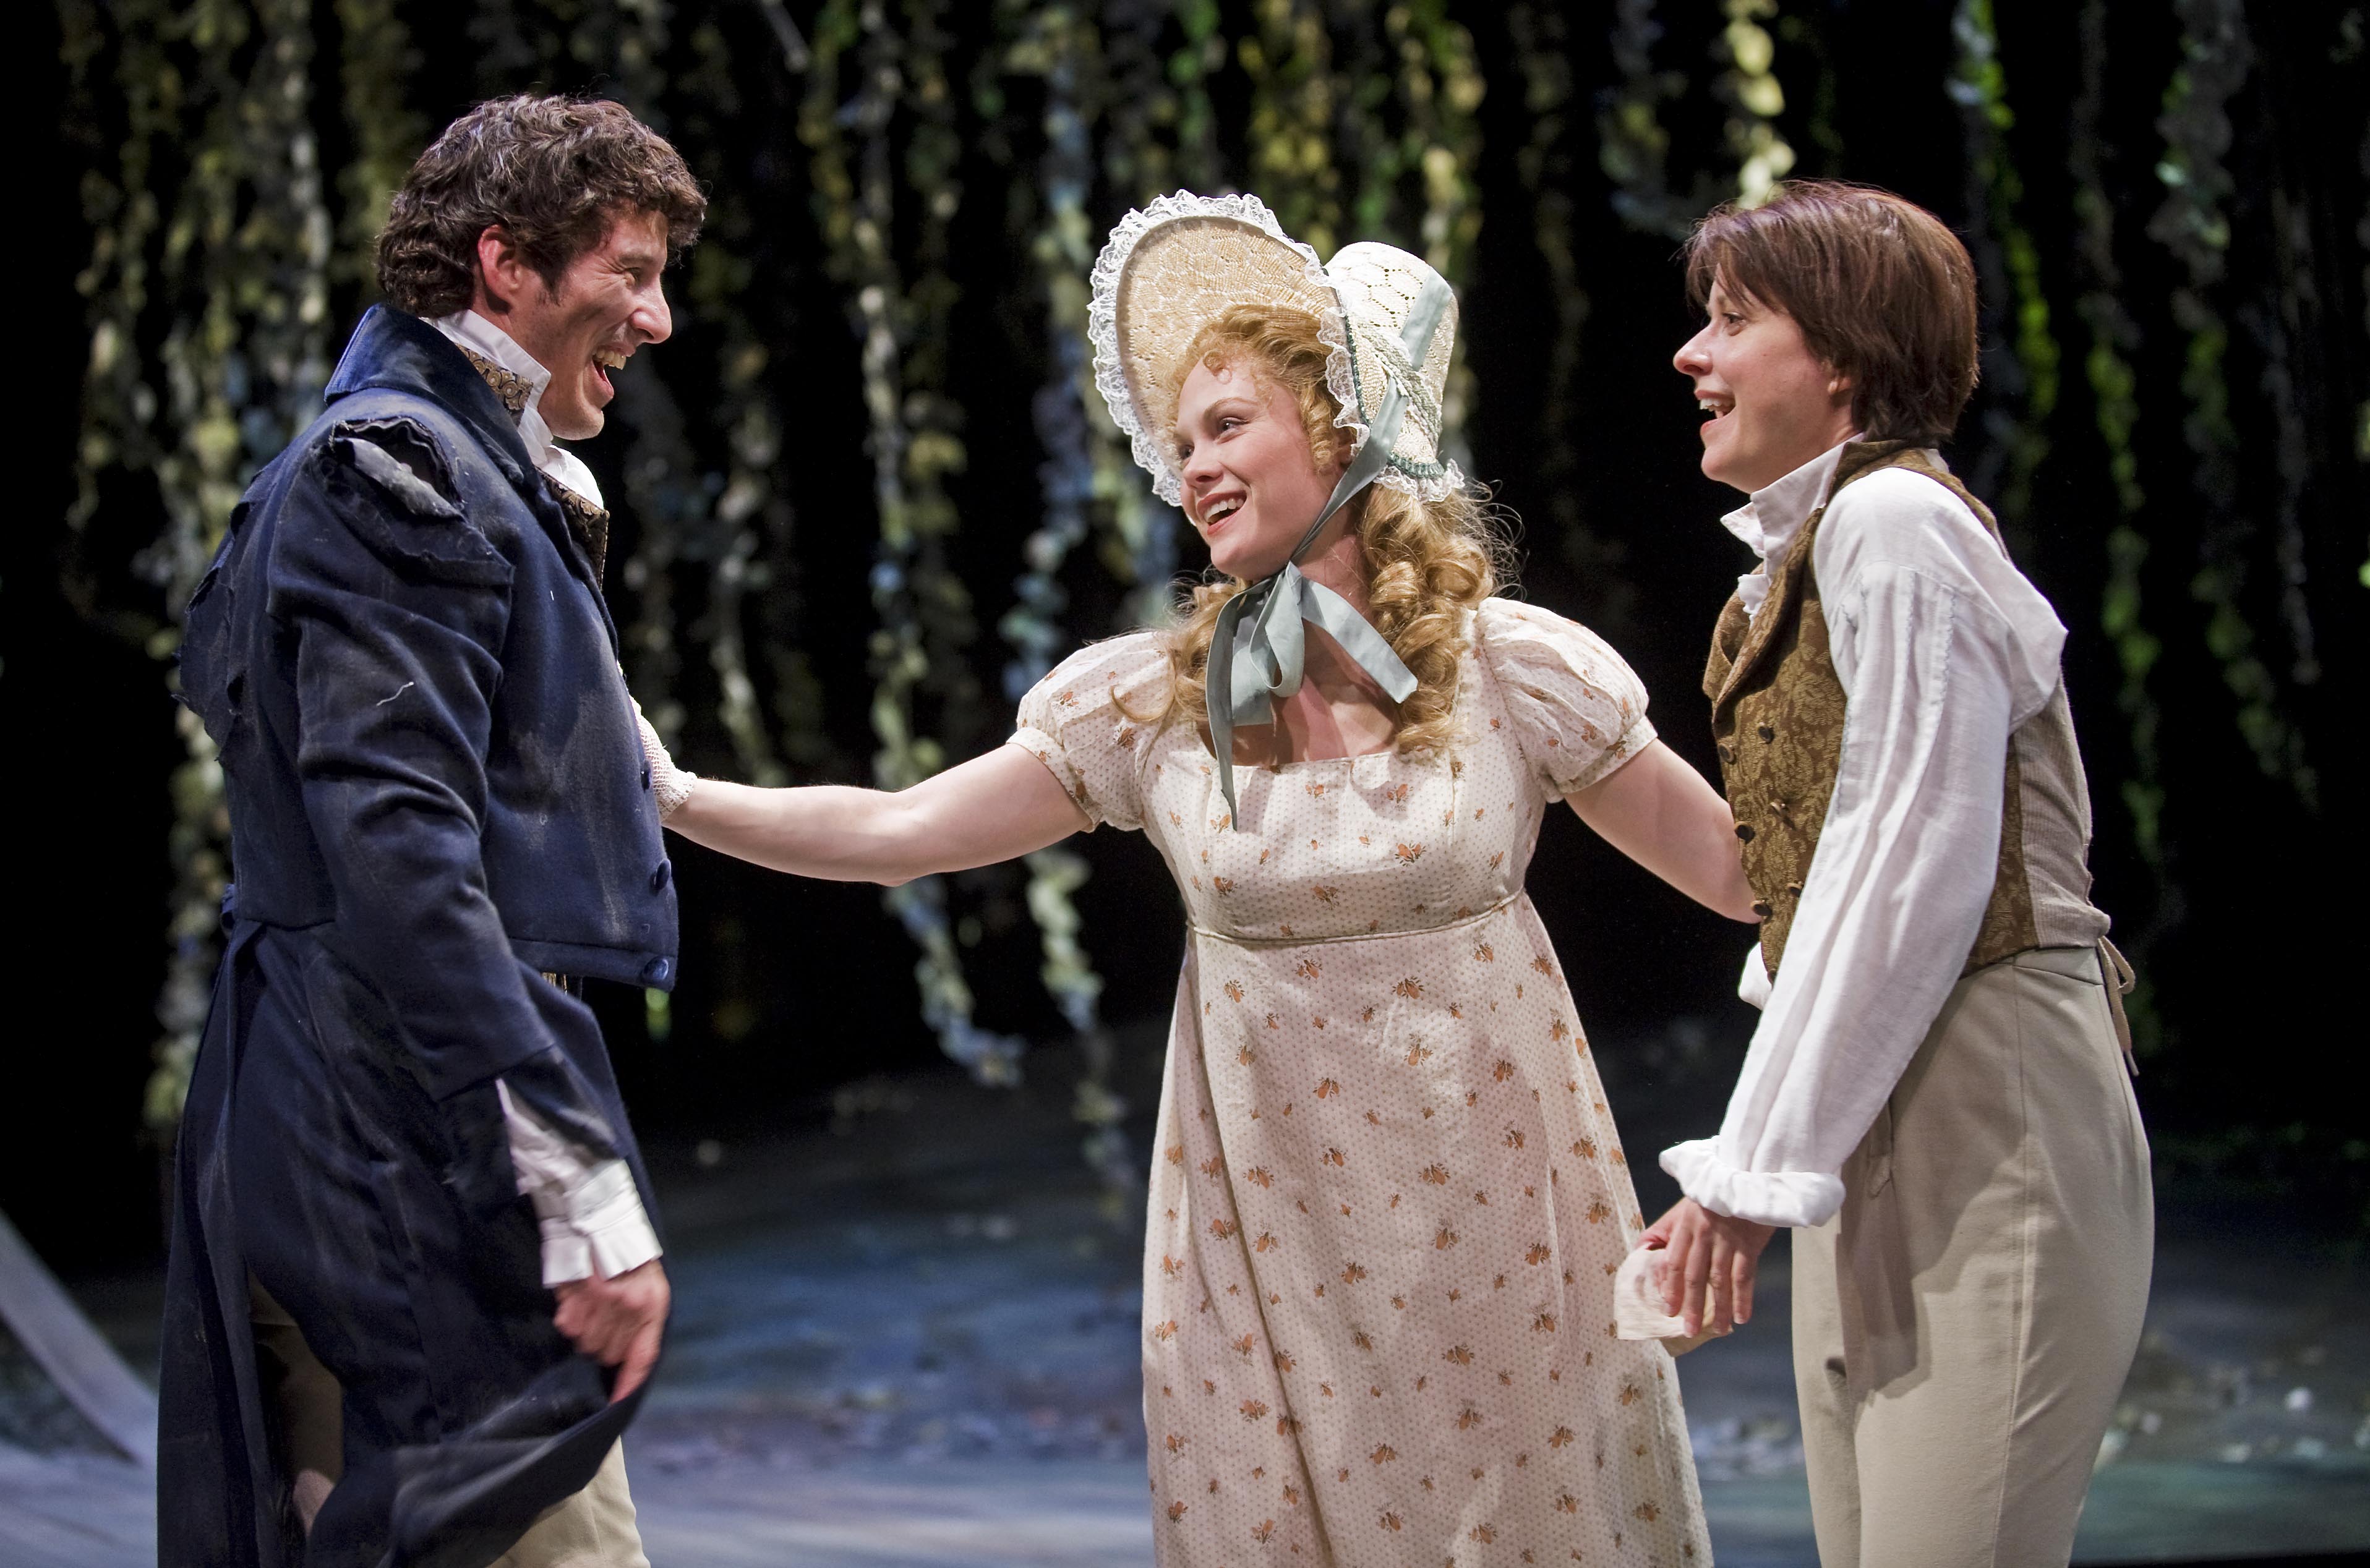 Jeff Parker (L) as Oliver in As You Like It at Chicago Shakespeare Theater, January 2011. Pictured with (l-r) Chaon Cross (Celia) and Kate Fry (Rosalind).